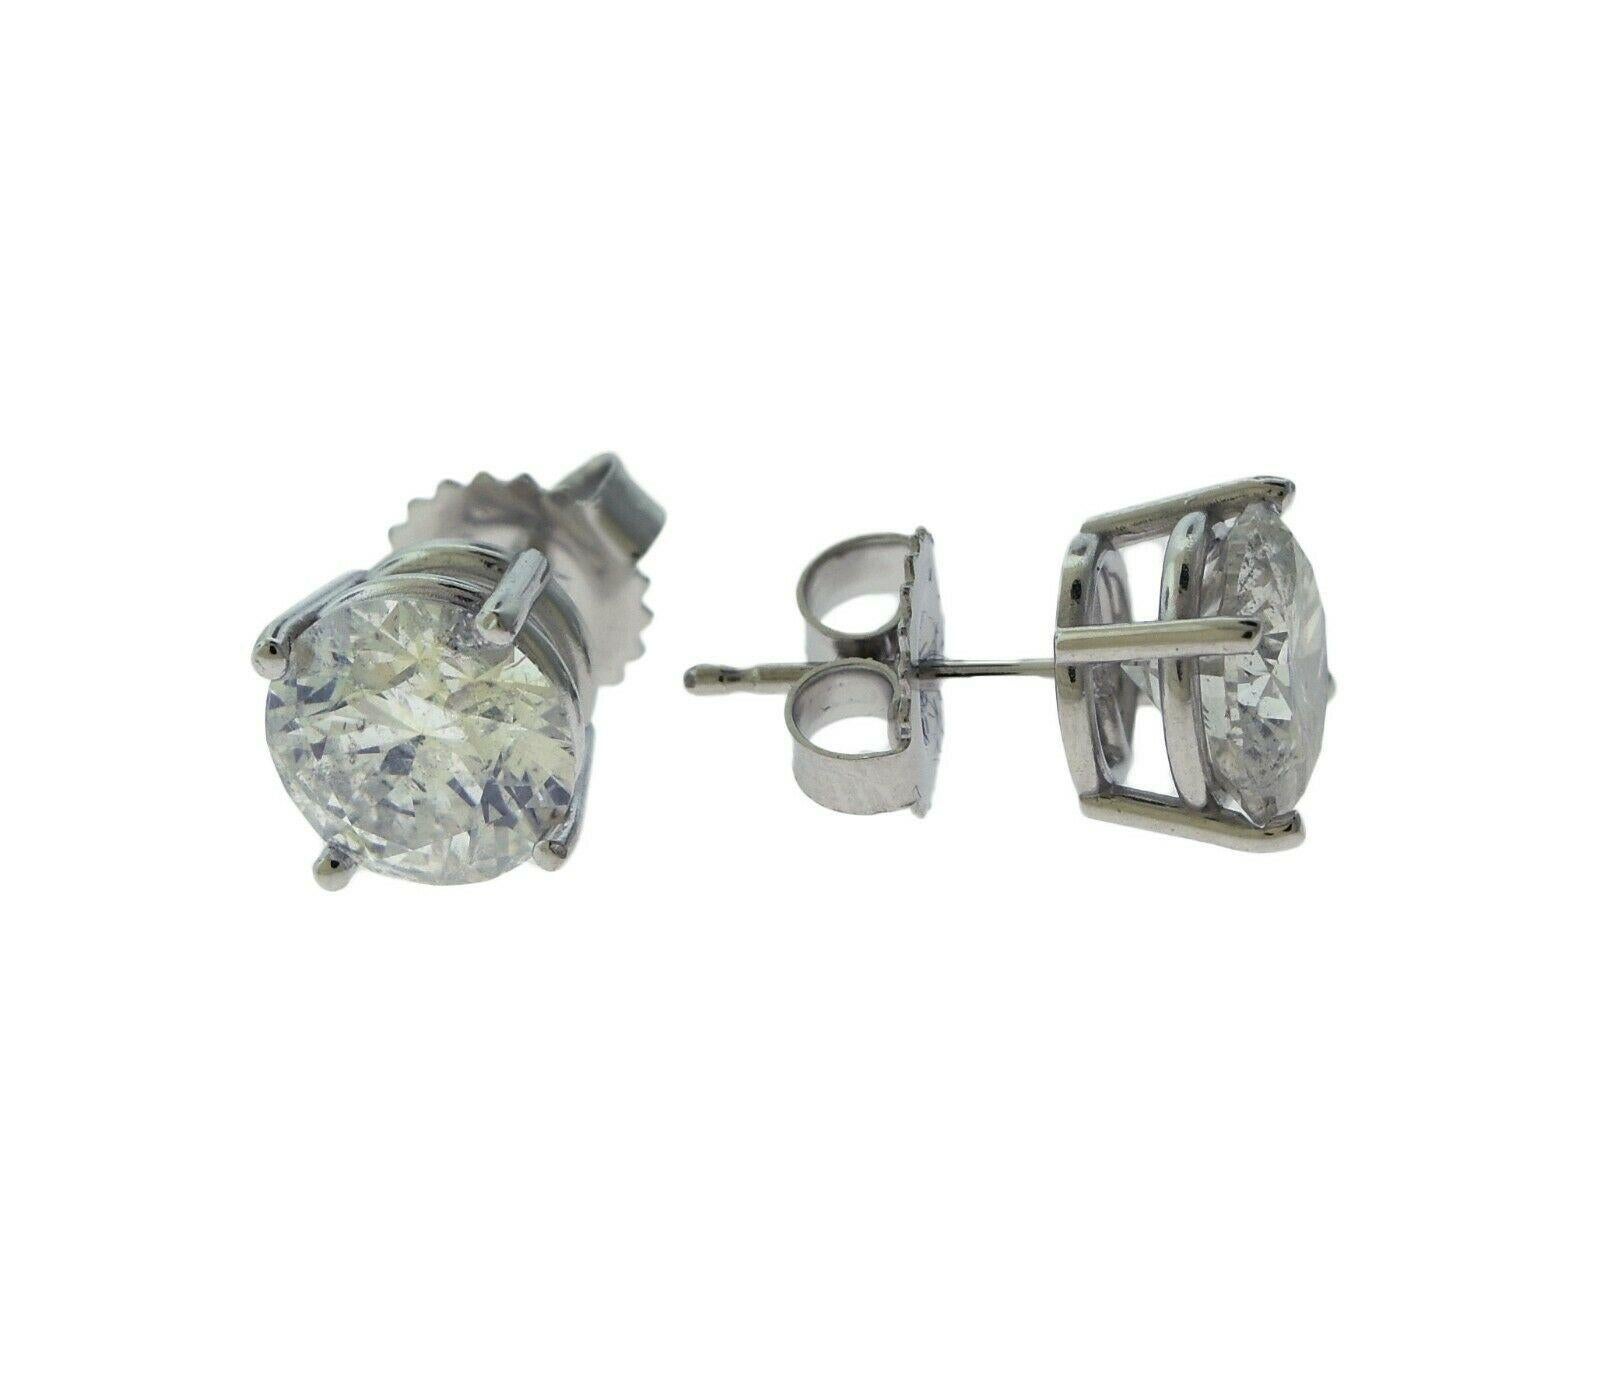 Round Cut 3.05 Total Carat Weight Brilliant Cut Diamond Stud Earrings in White Gold